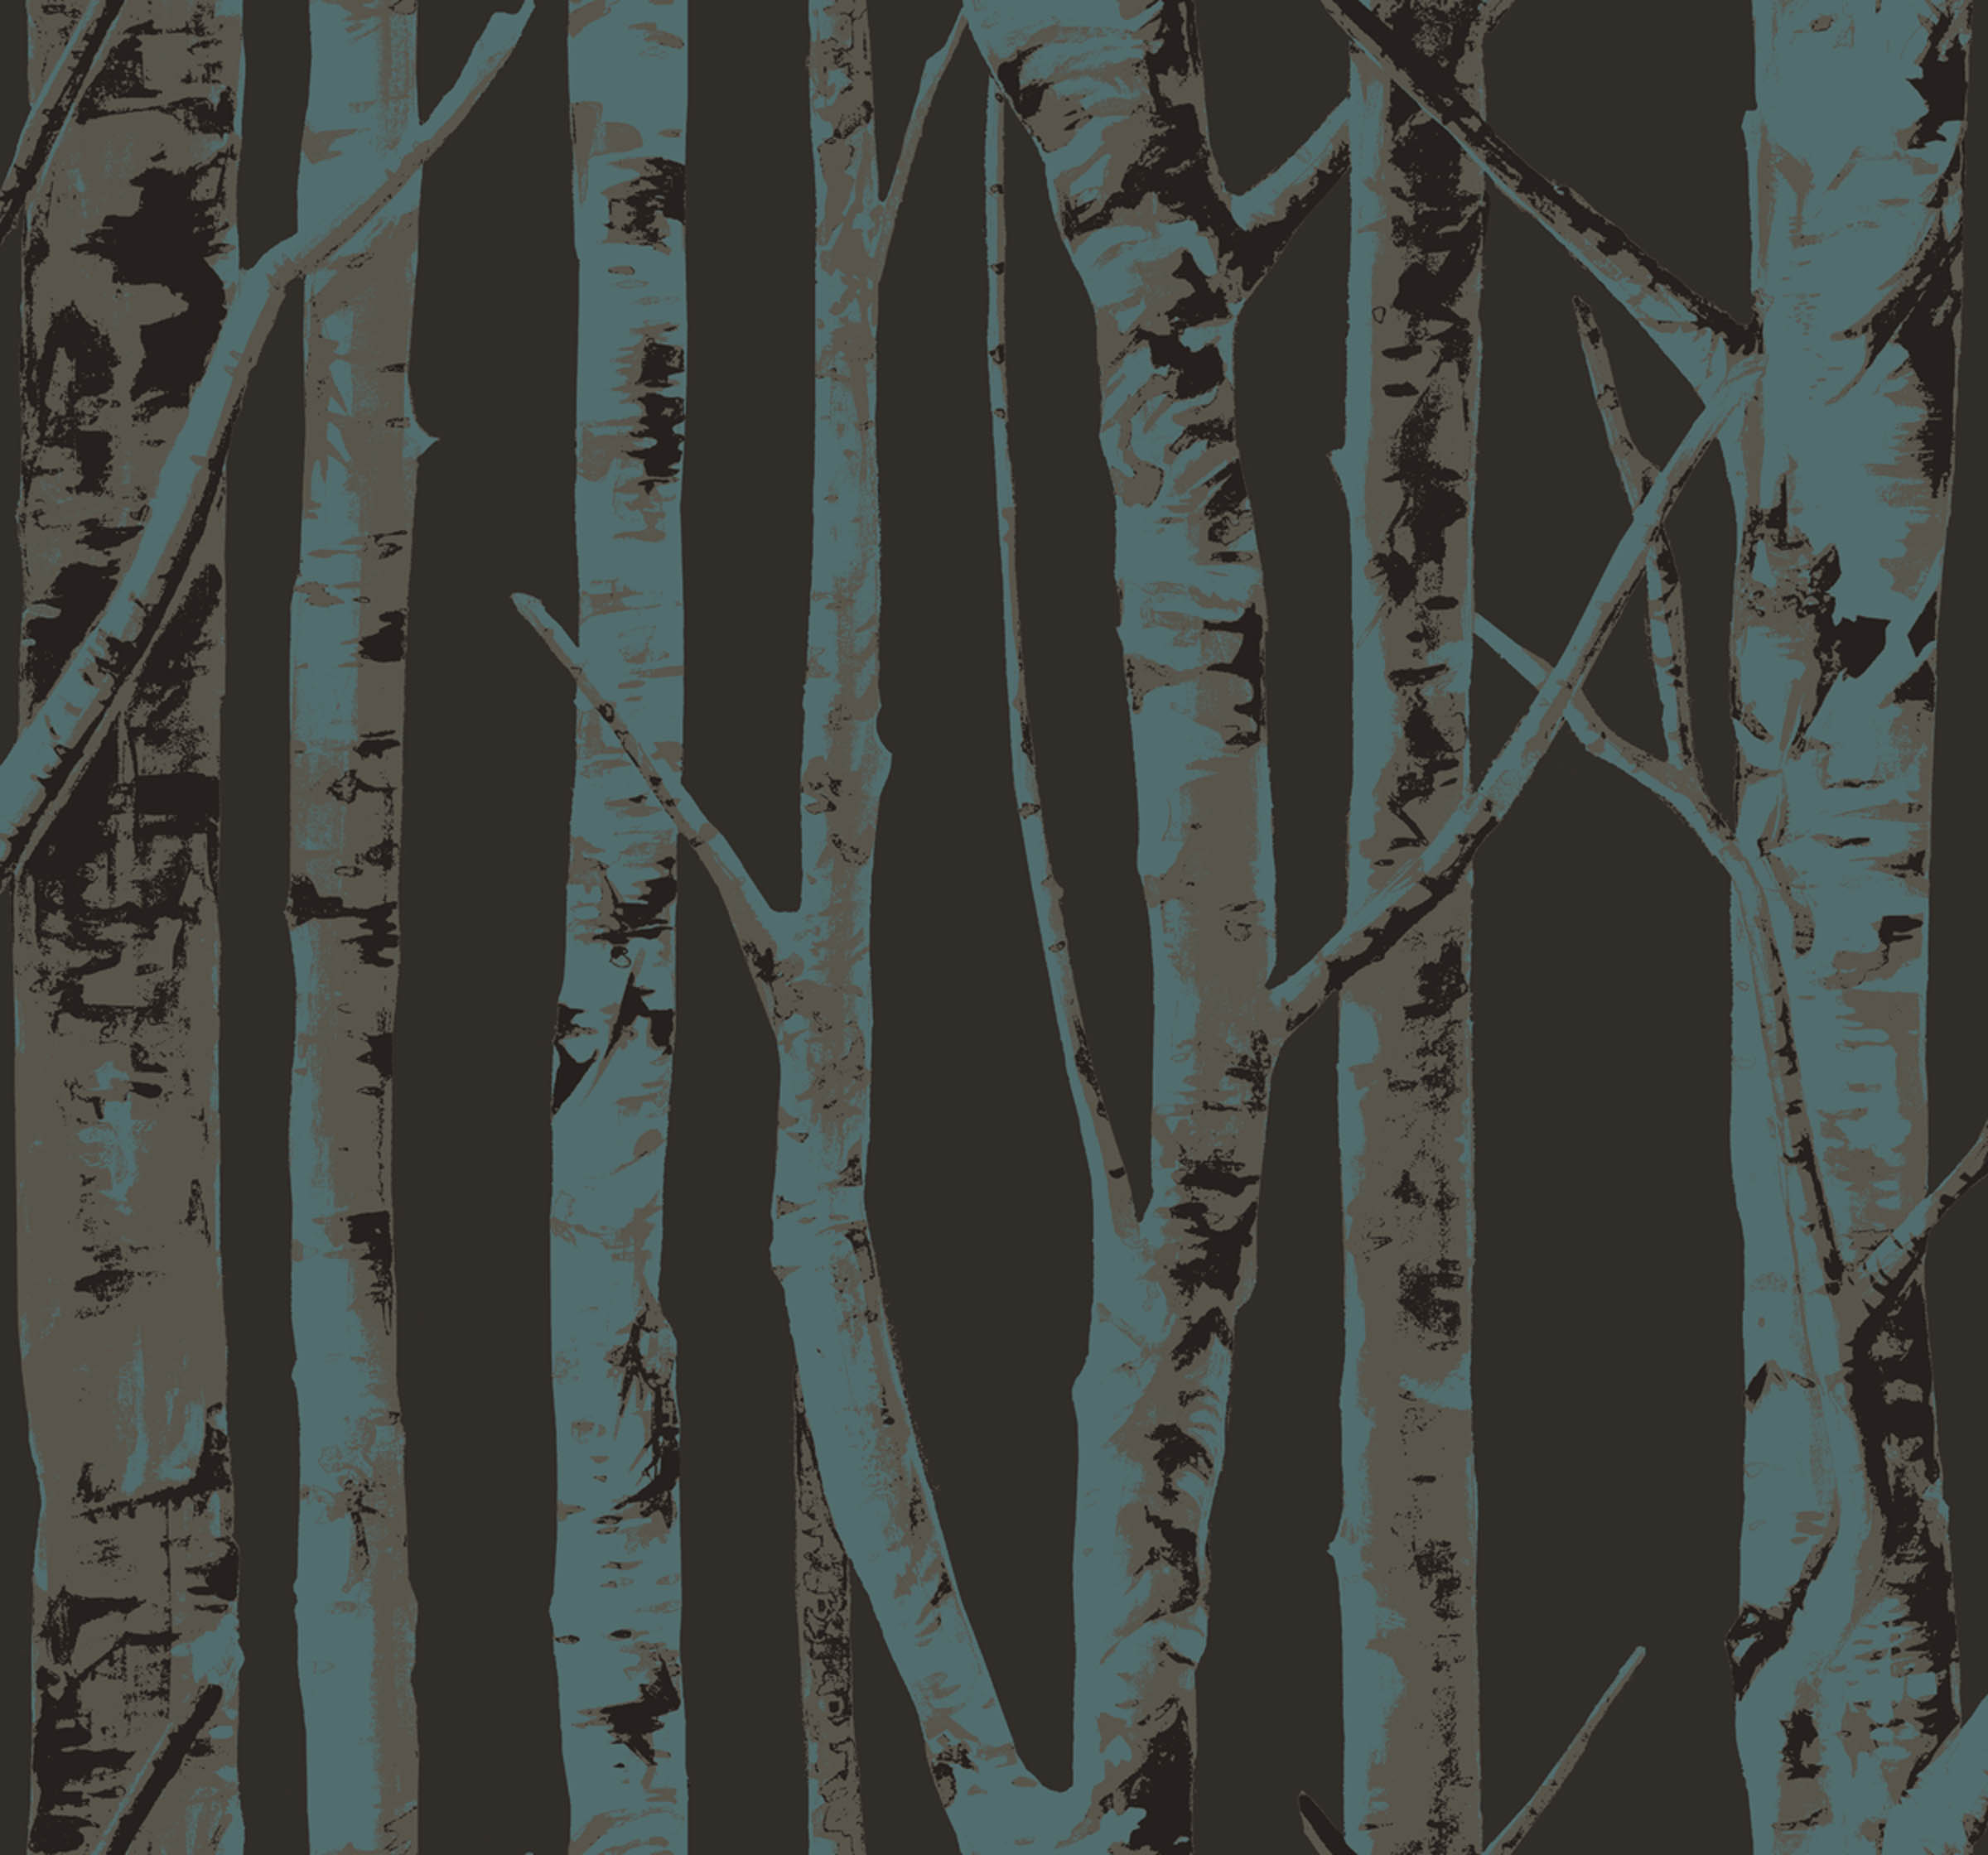  trees design from sandpiper studios eco chic wallpaper collection 2400x2240